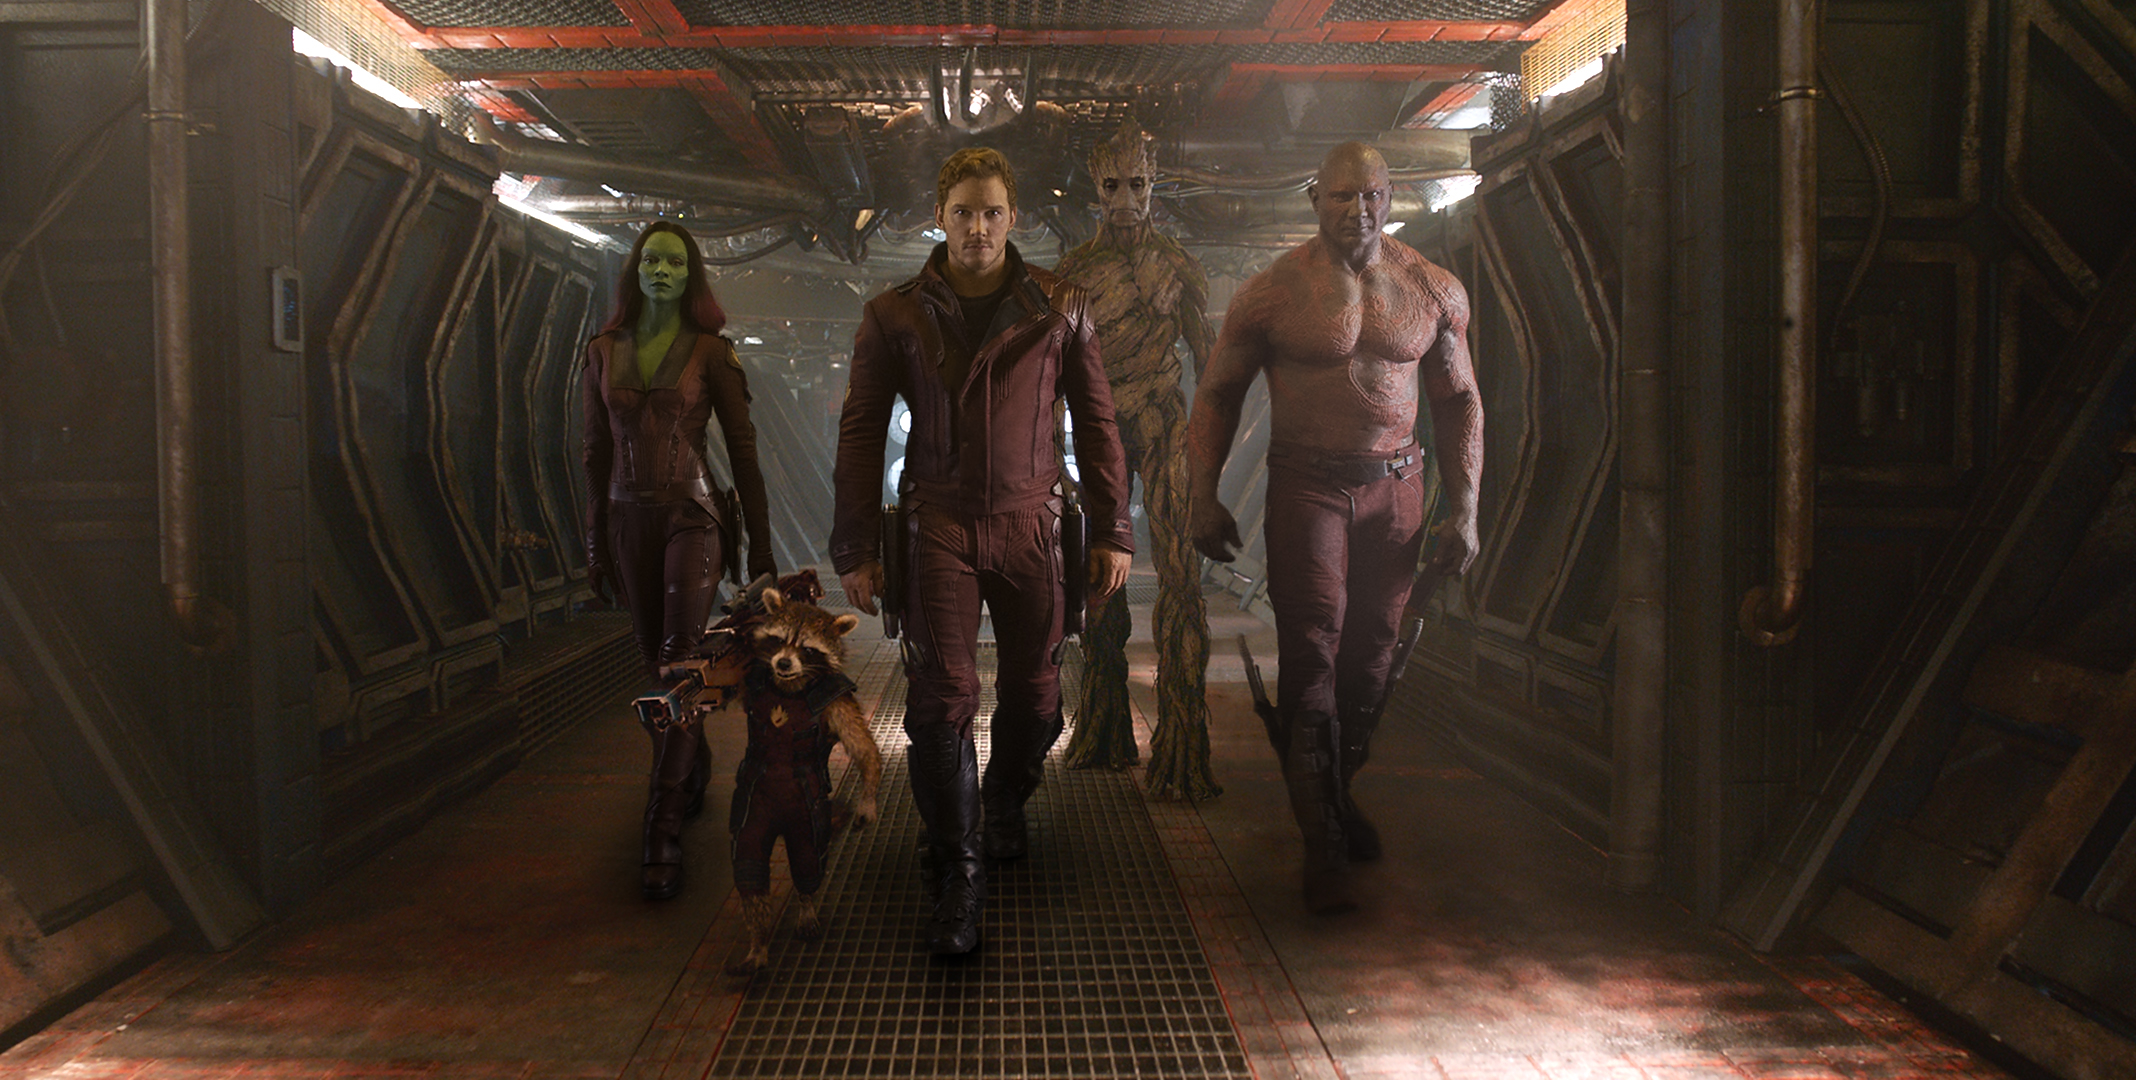 "Guardians of the Galaxy" cast